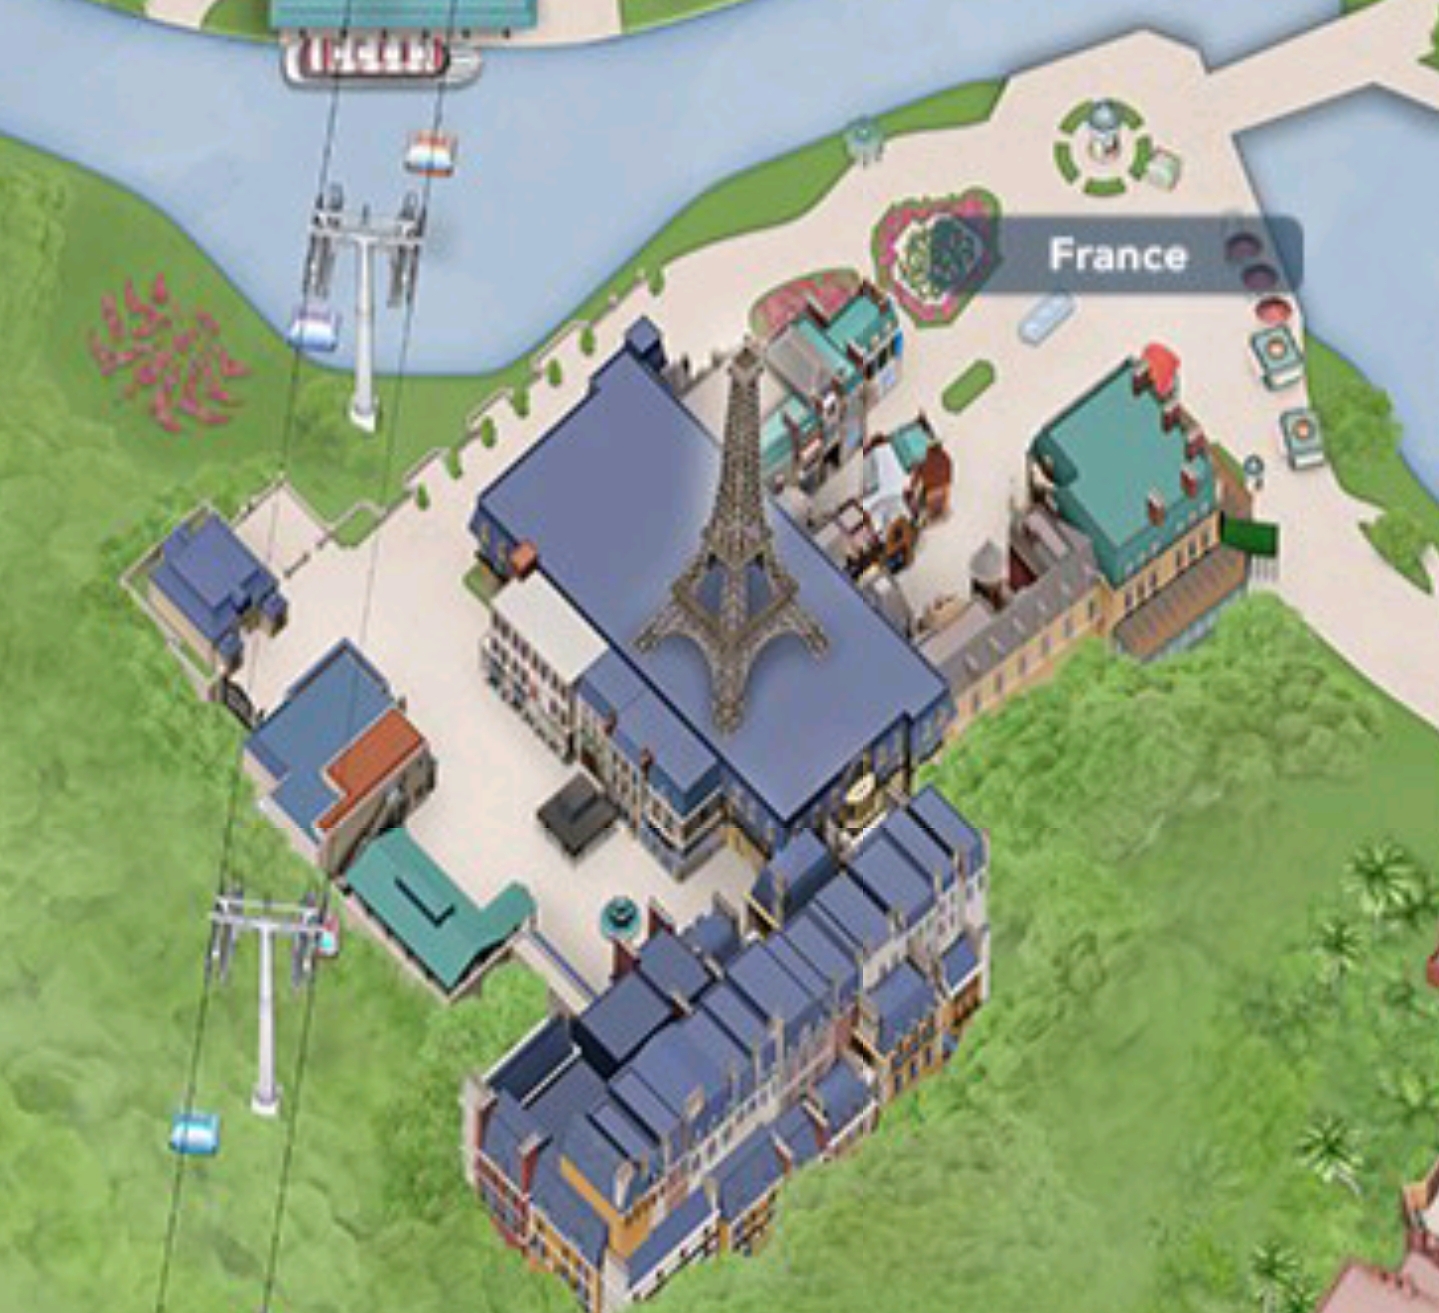 Epcot’s France Pavilion expansion including Remy’s Ratatouille Adventure added to My Disney Experience